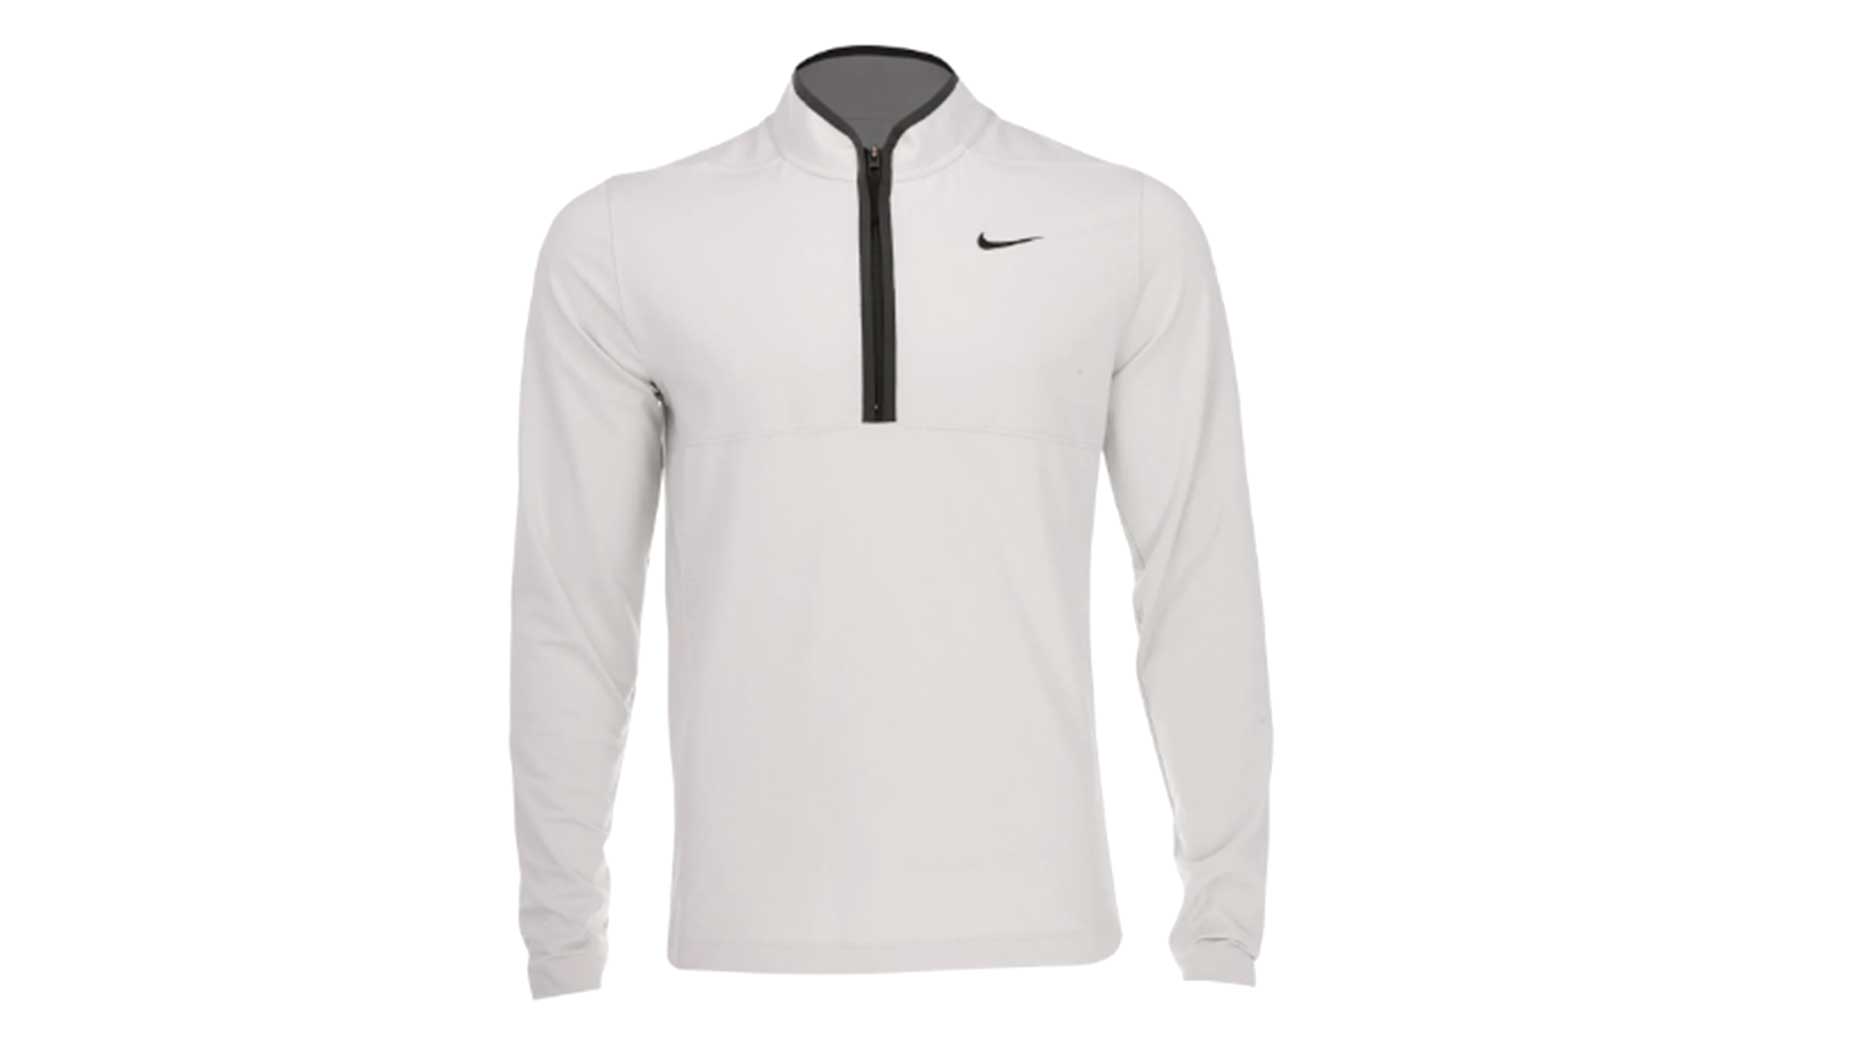 This Nike half-zip is comfortable and won't hinder your swing